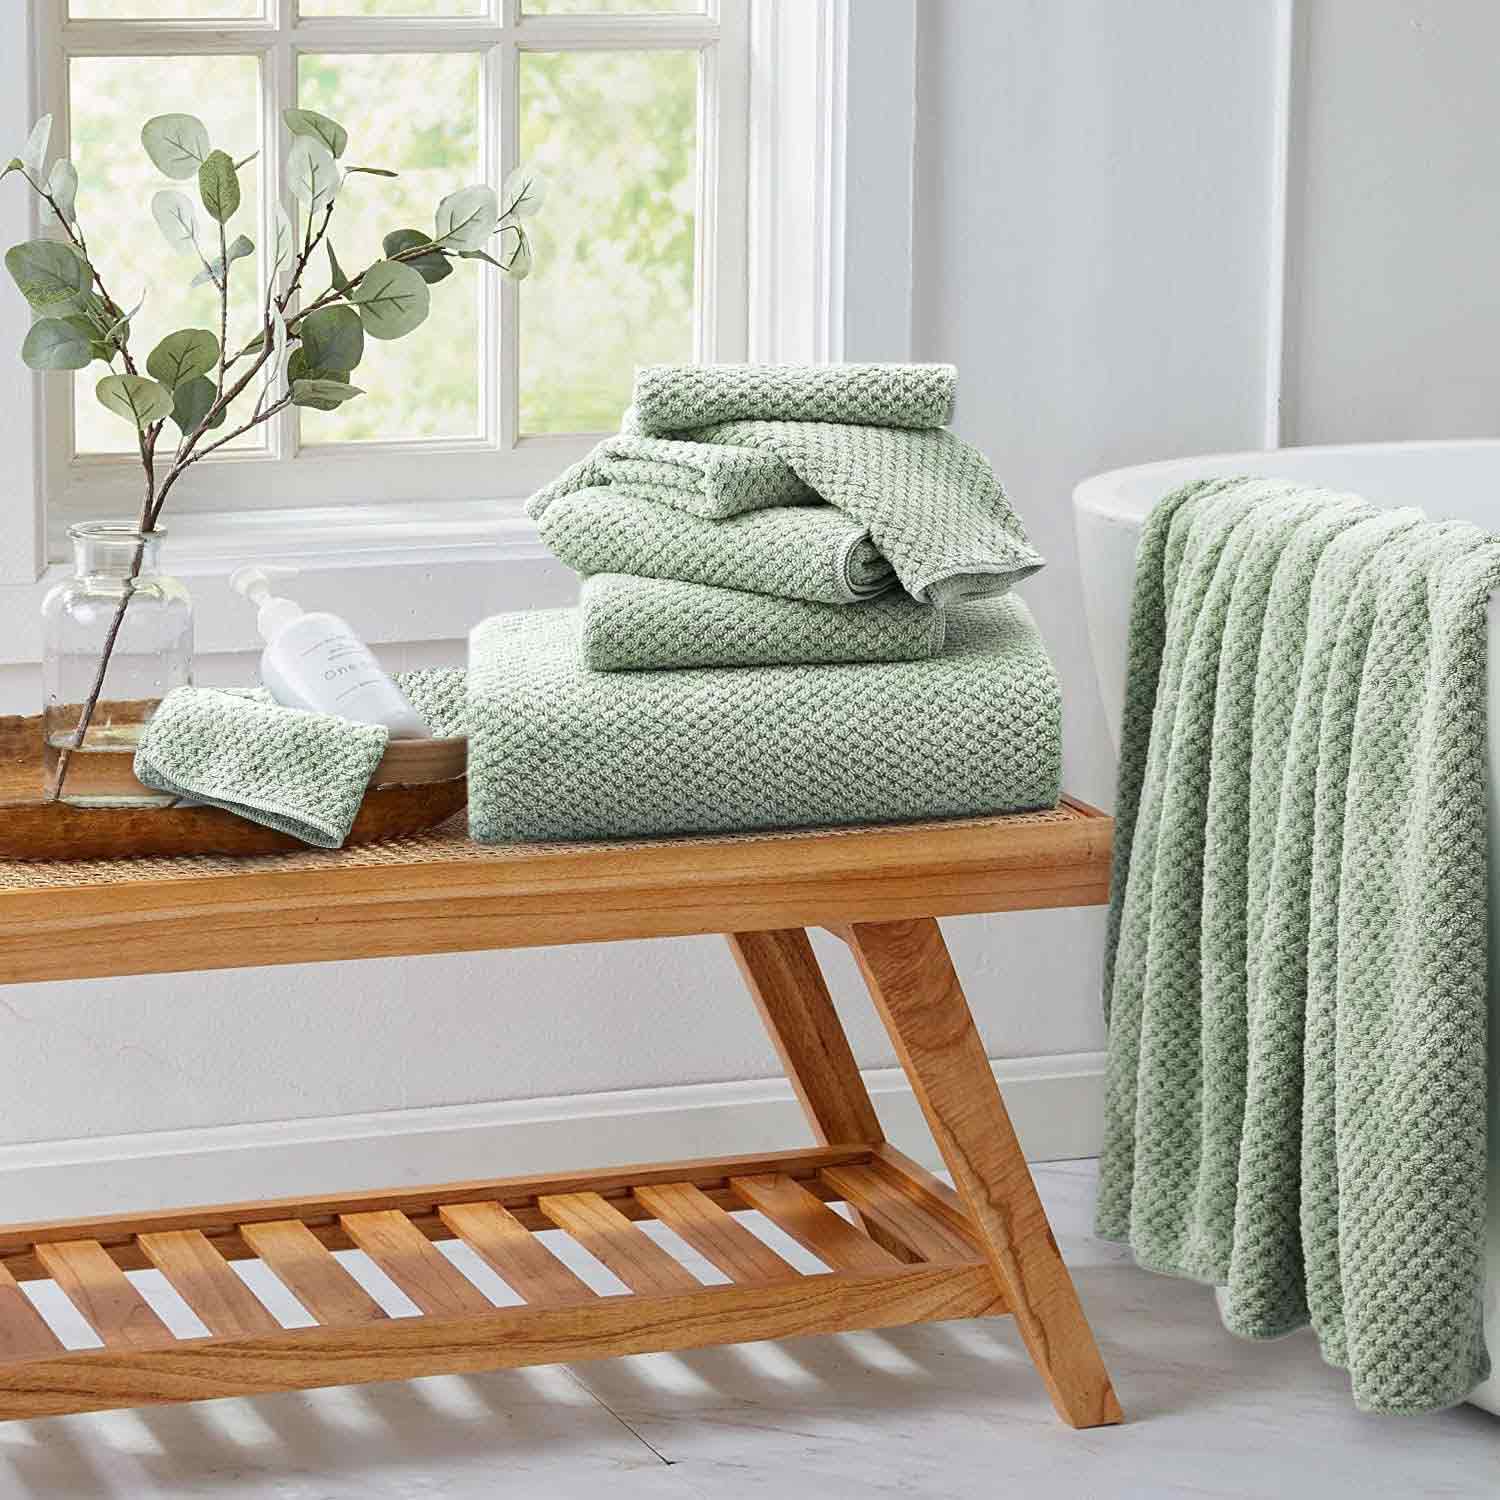 Green plush towels on a wooden low table